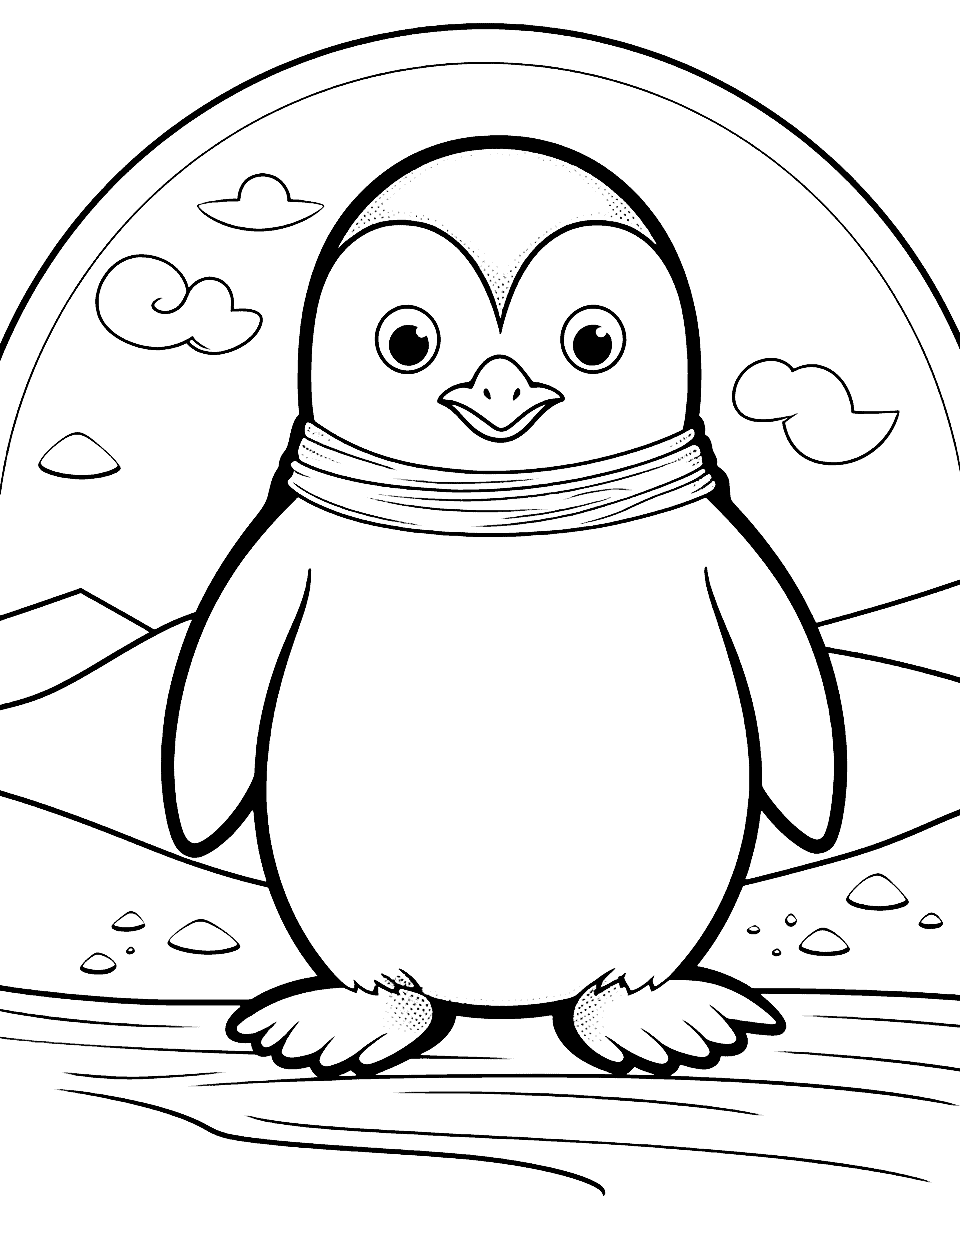 Cute Penguin Animal Coloring Page - A chubby penguin waddling on an icy landscape.